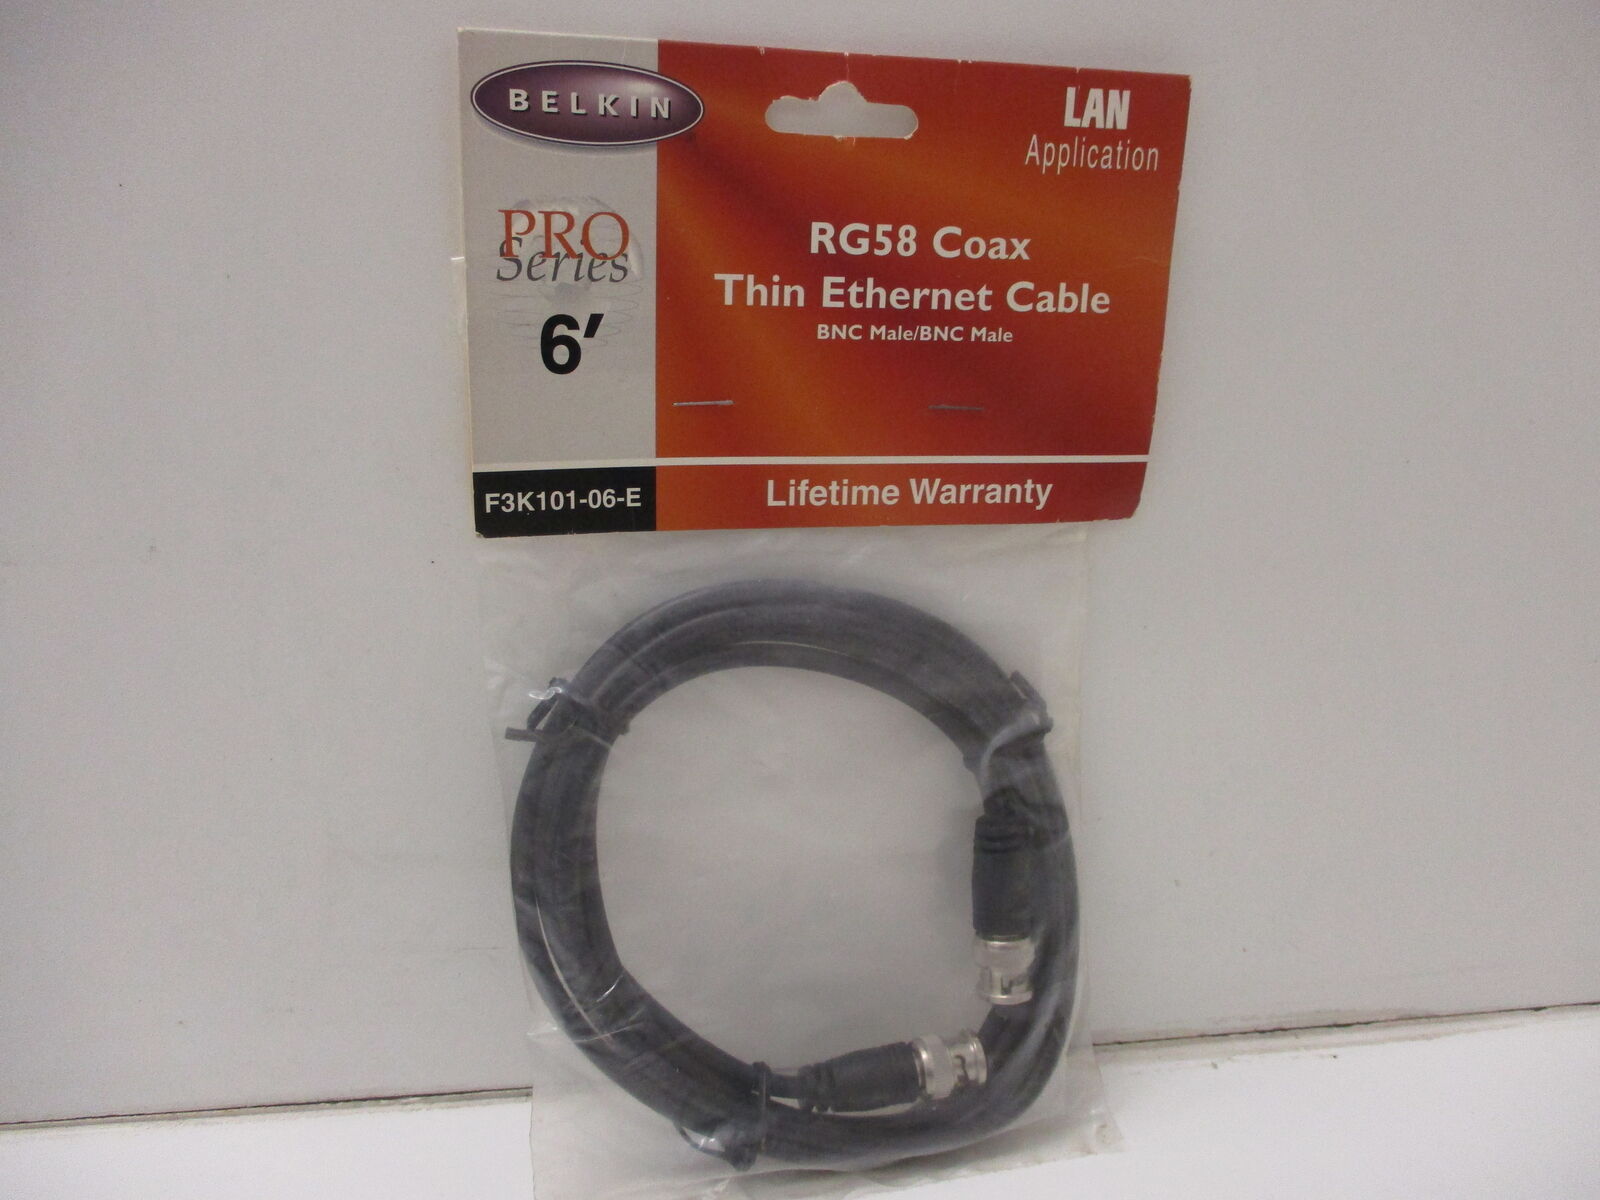 *NEW* BELKIN F3K101-06-E / RG58 COAX THIN ETHERNET CABLE 6'